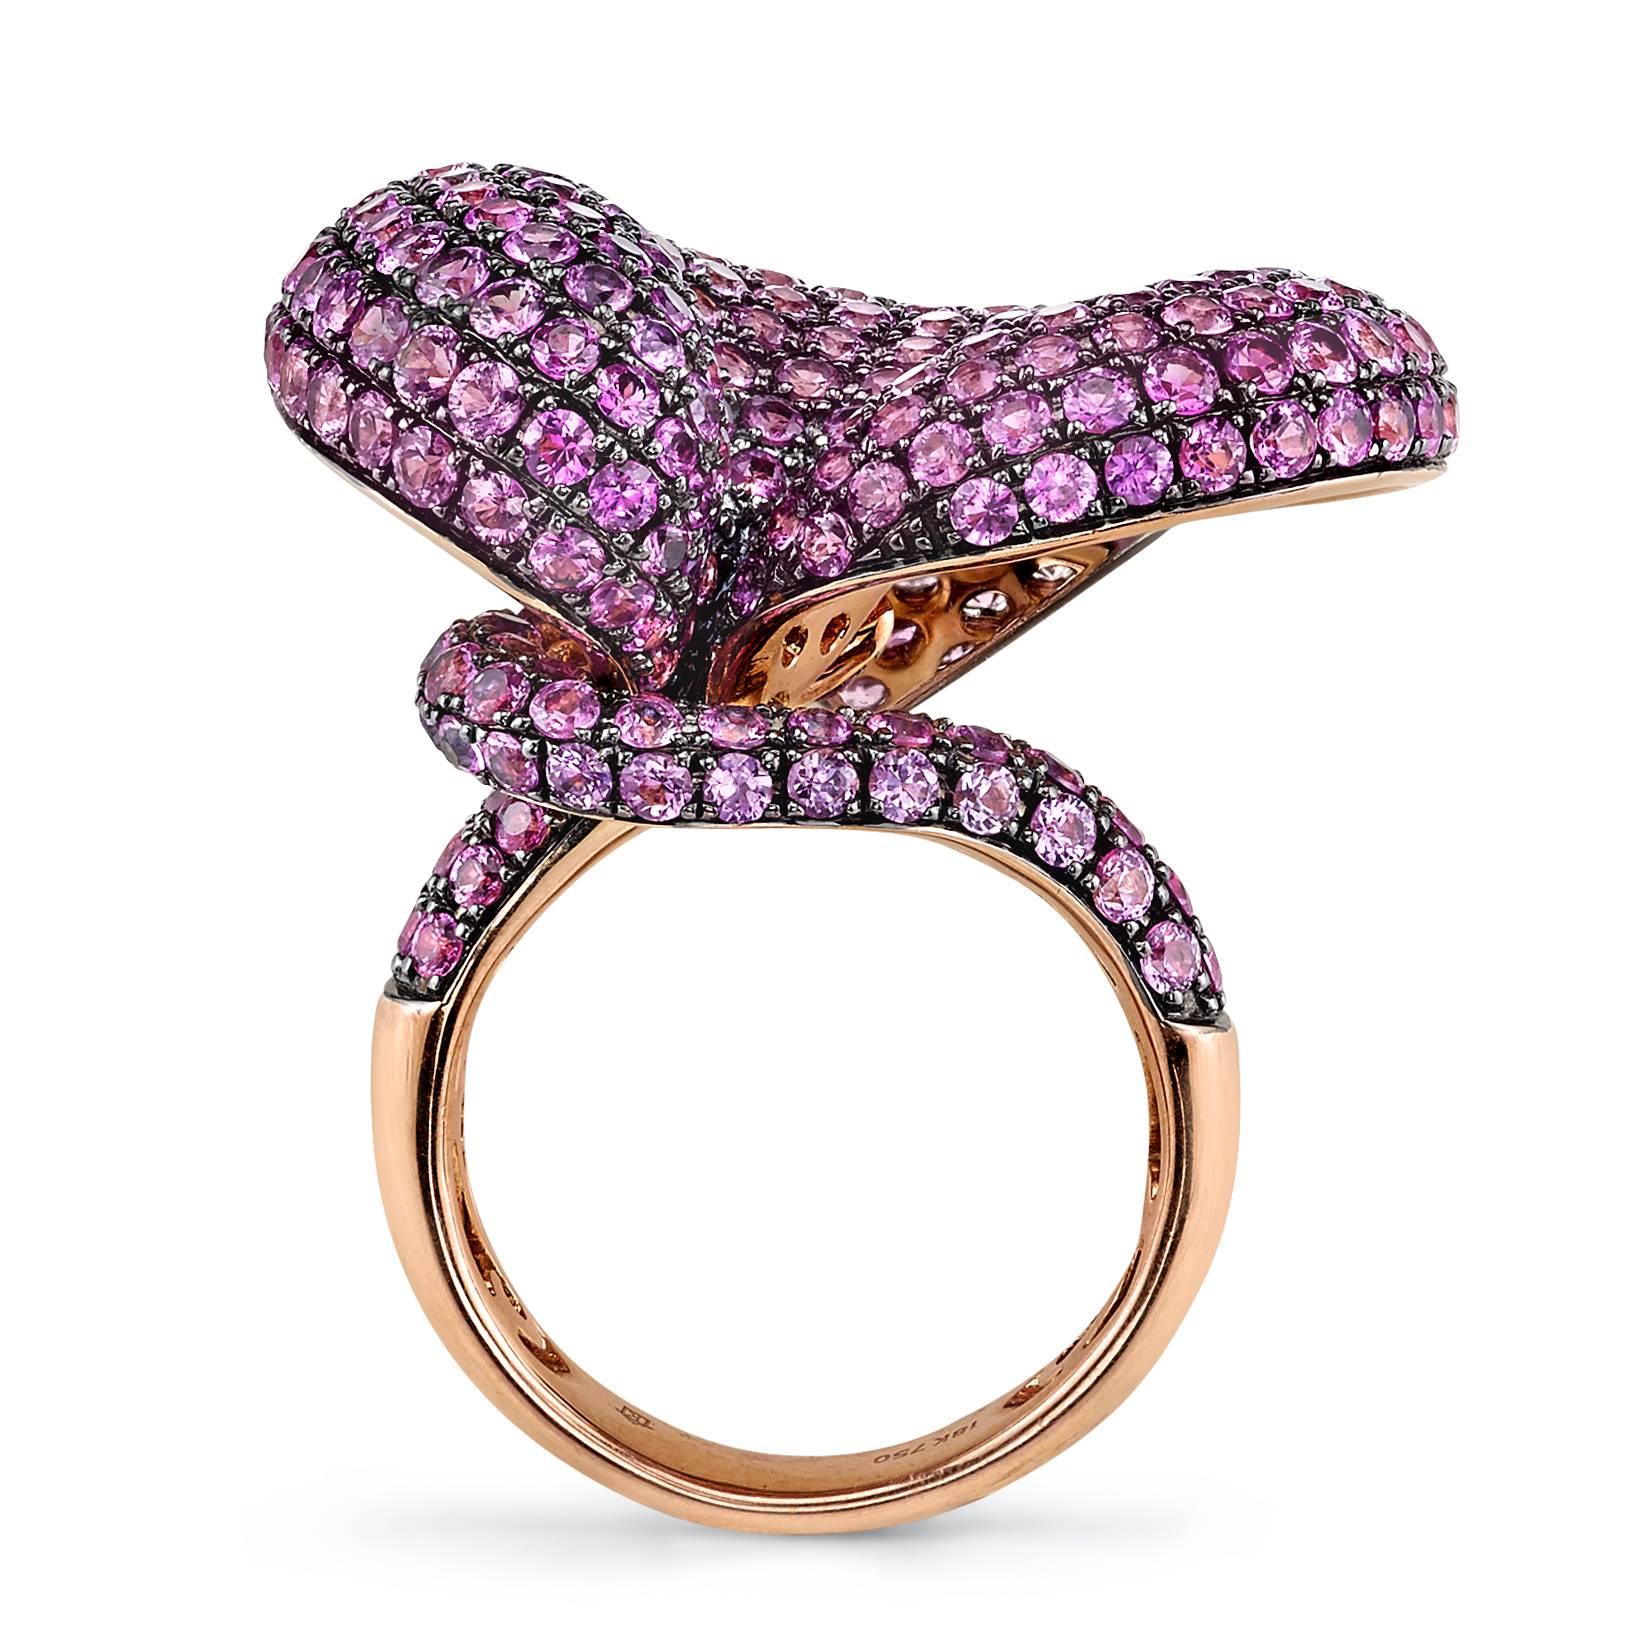 Regarded in folklore as "Stones of Wisdom," sapphires honor the higher mind and have been worn throughout the ages for protection, good fortune, and spiritual insight. Pink sapphires are believed to be particularly useful for assisting the